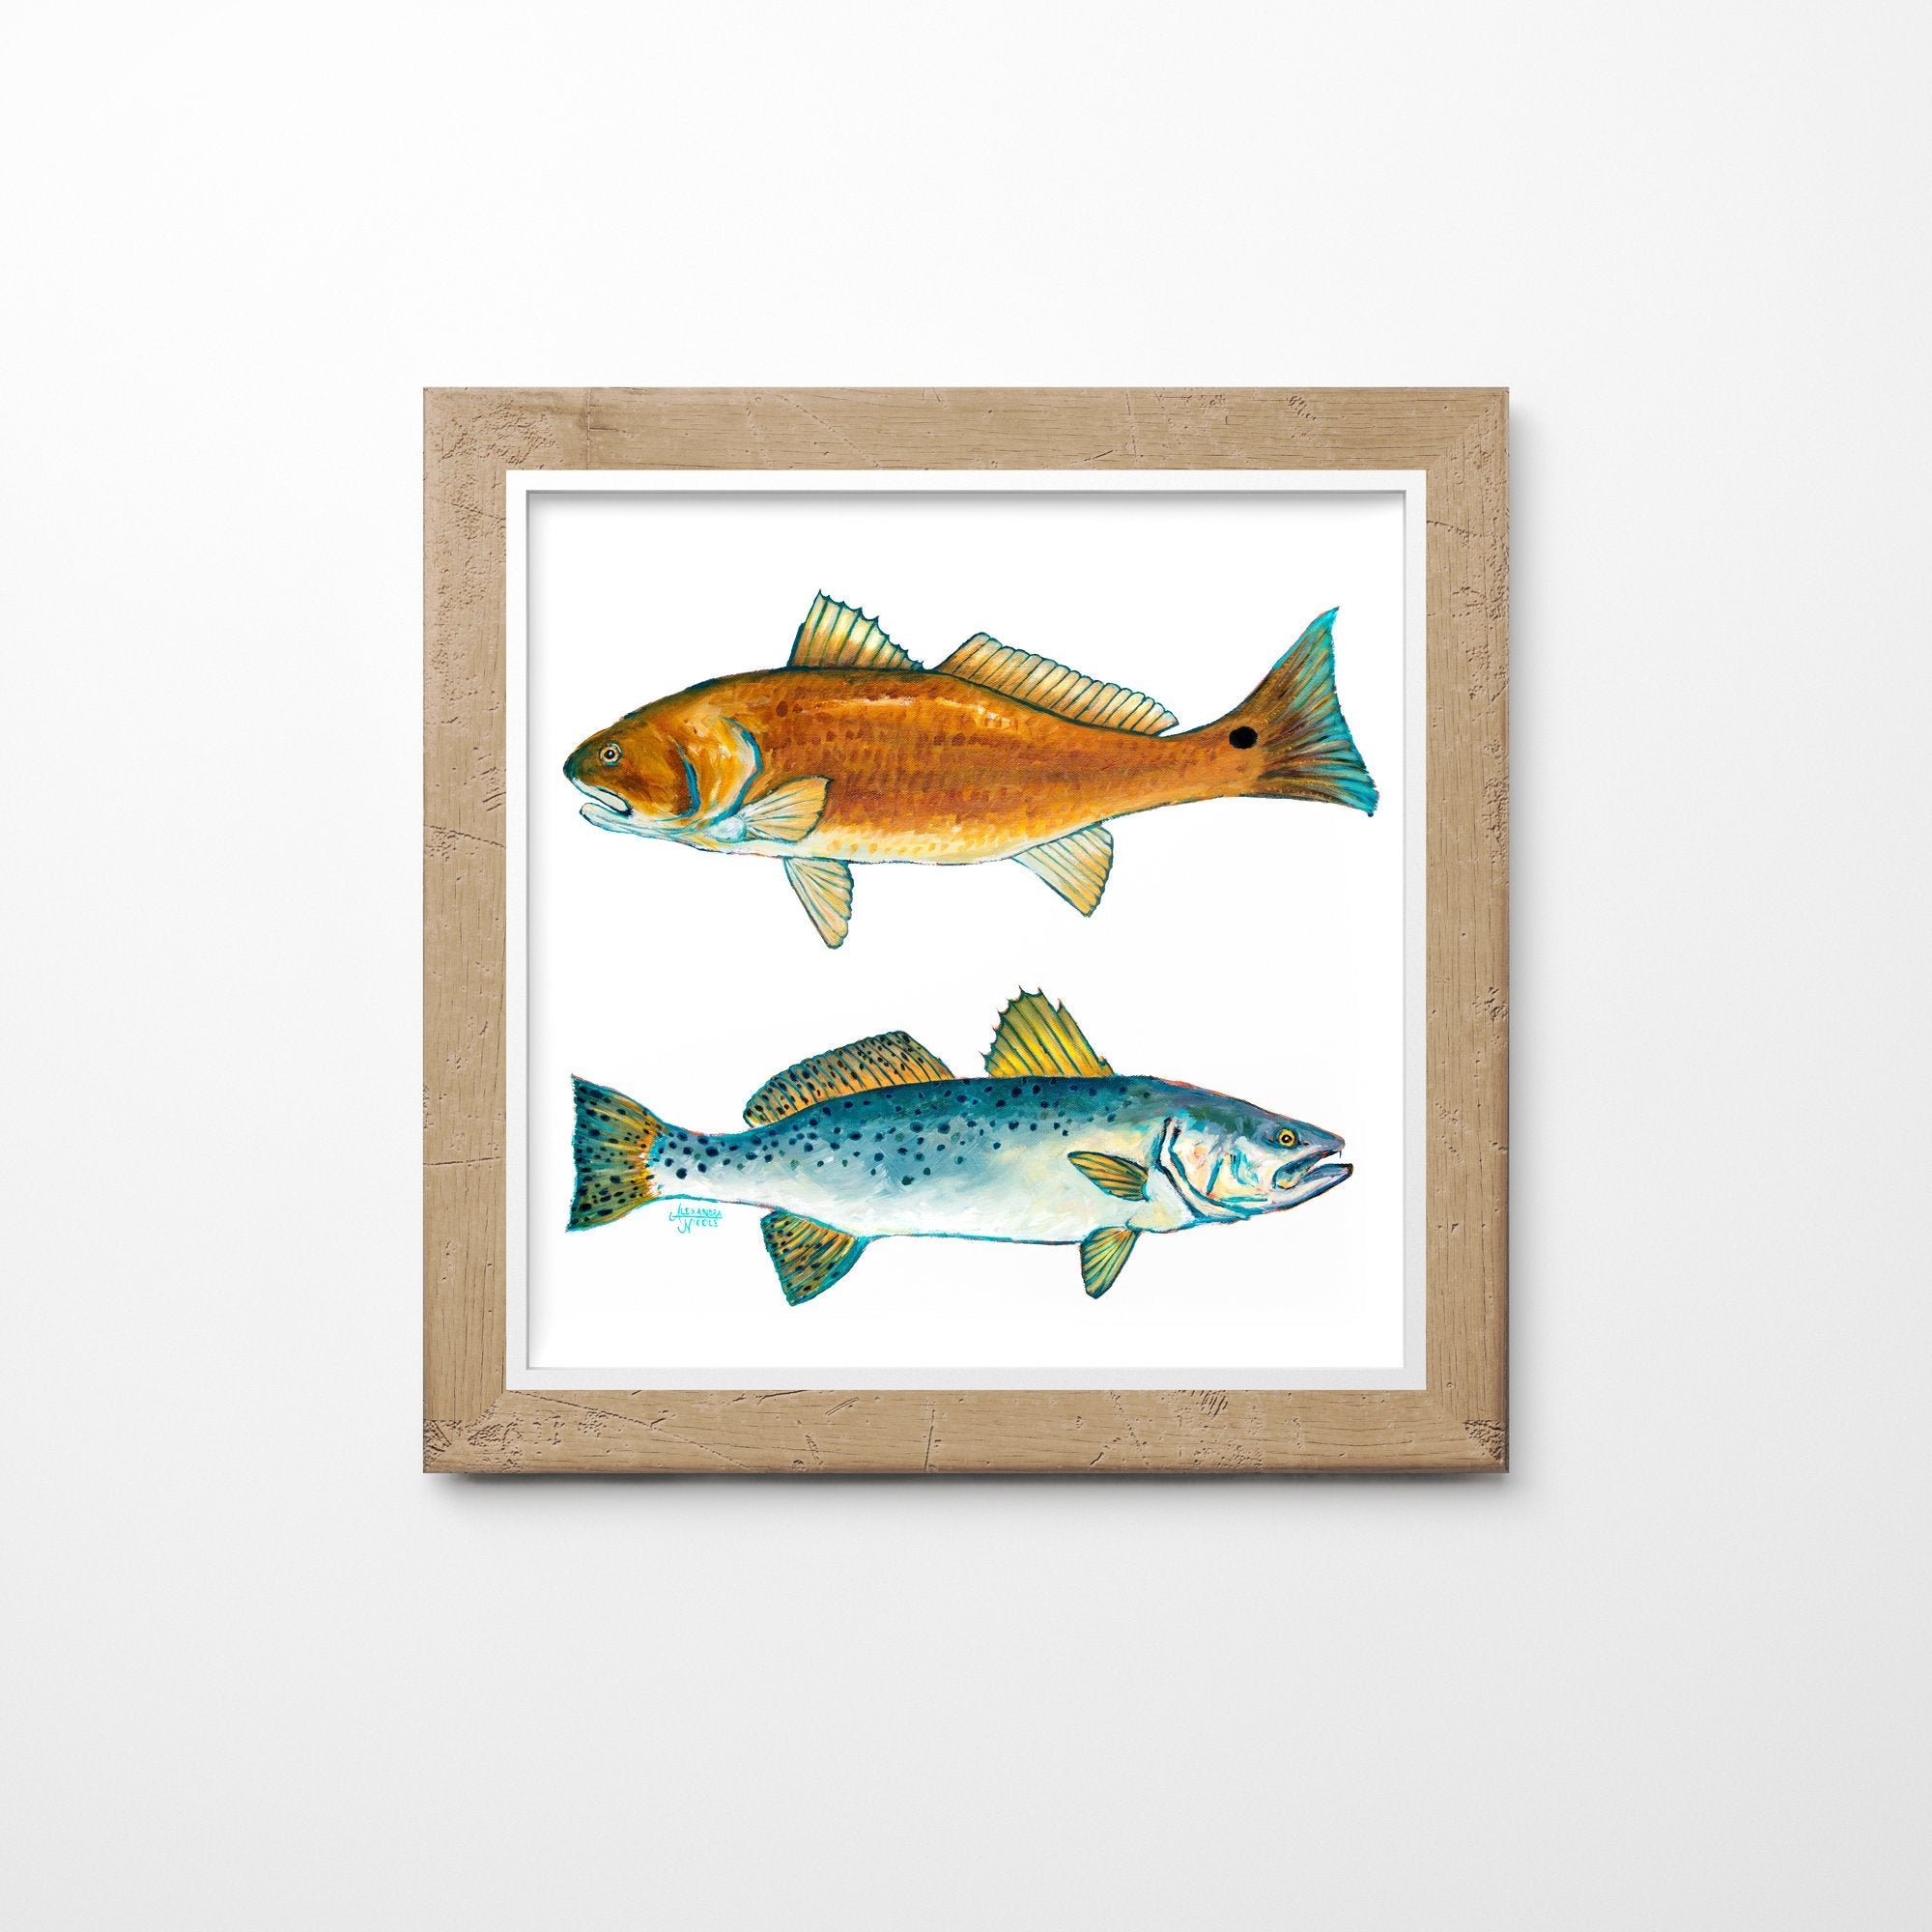 Red Drum Fish Print and Speckled Sea Trout Art Print - ArtByAlexandraNicole